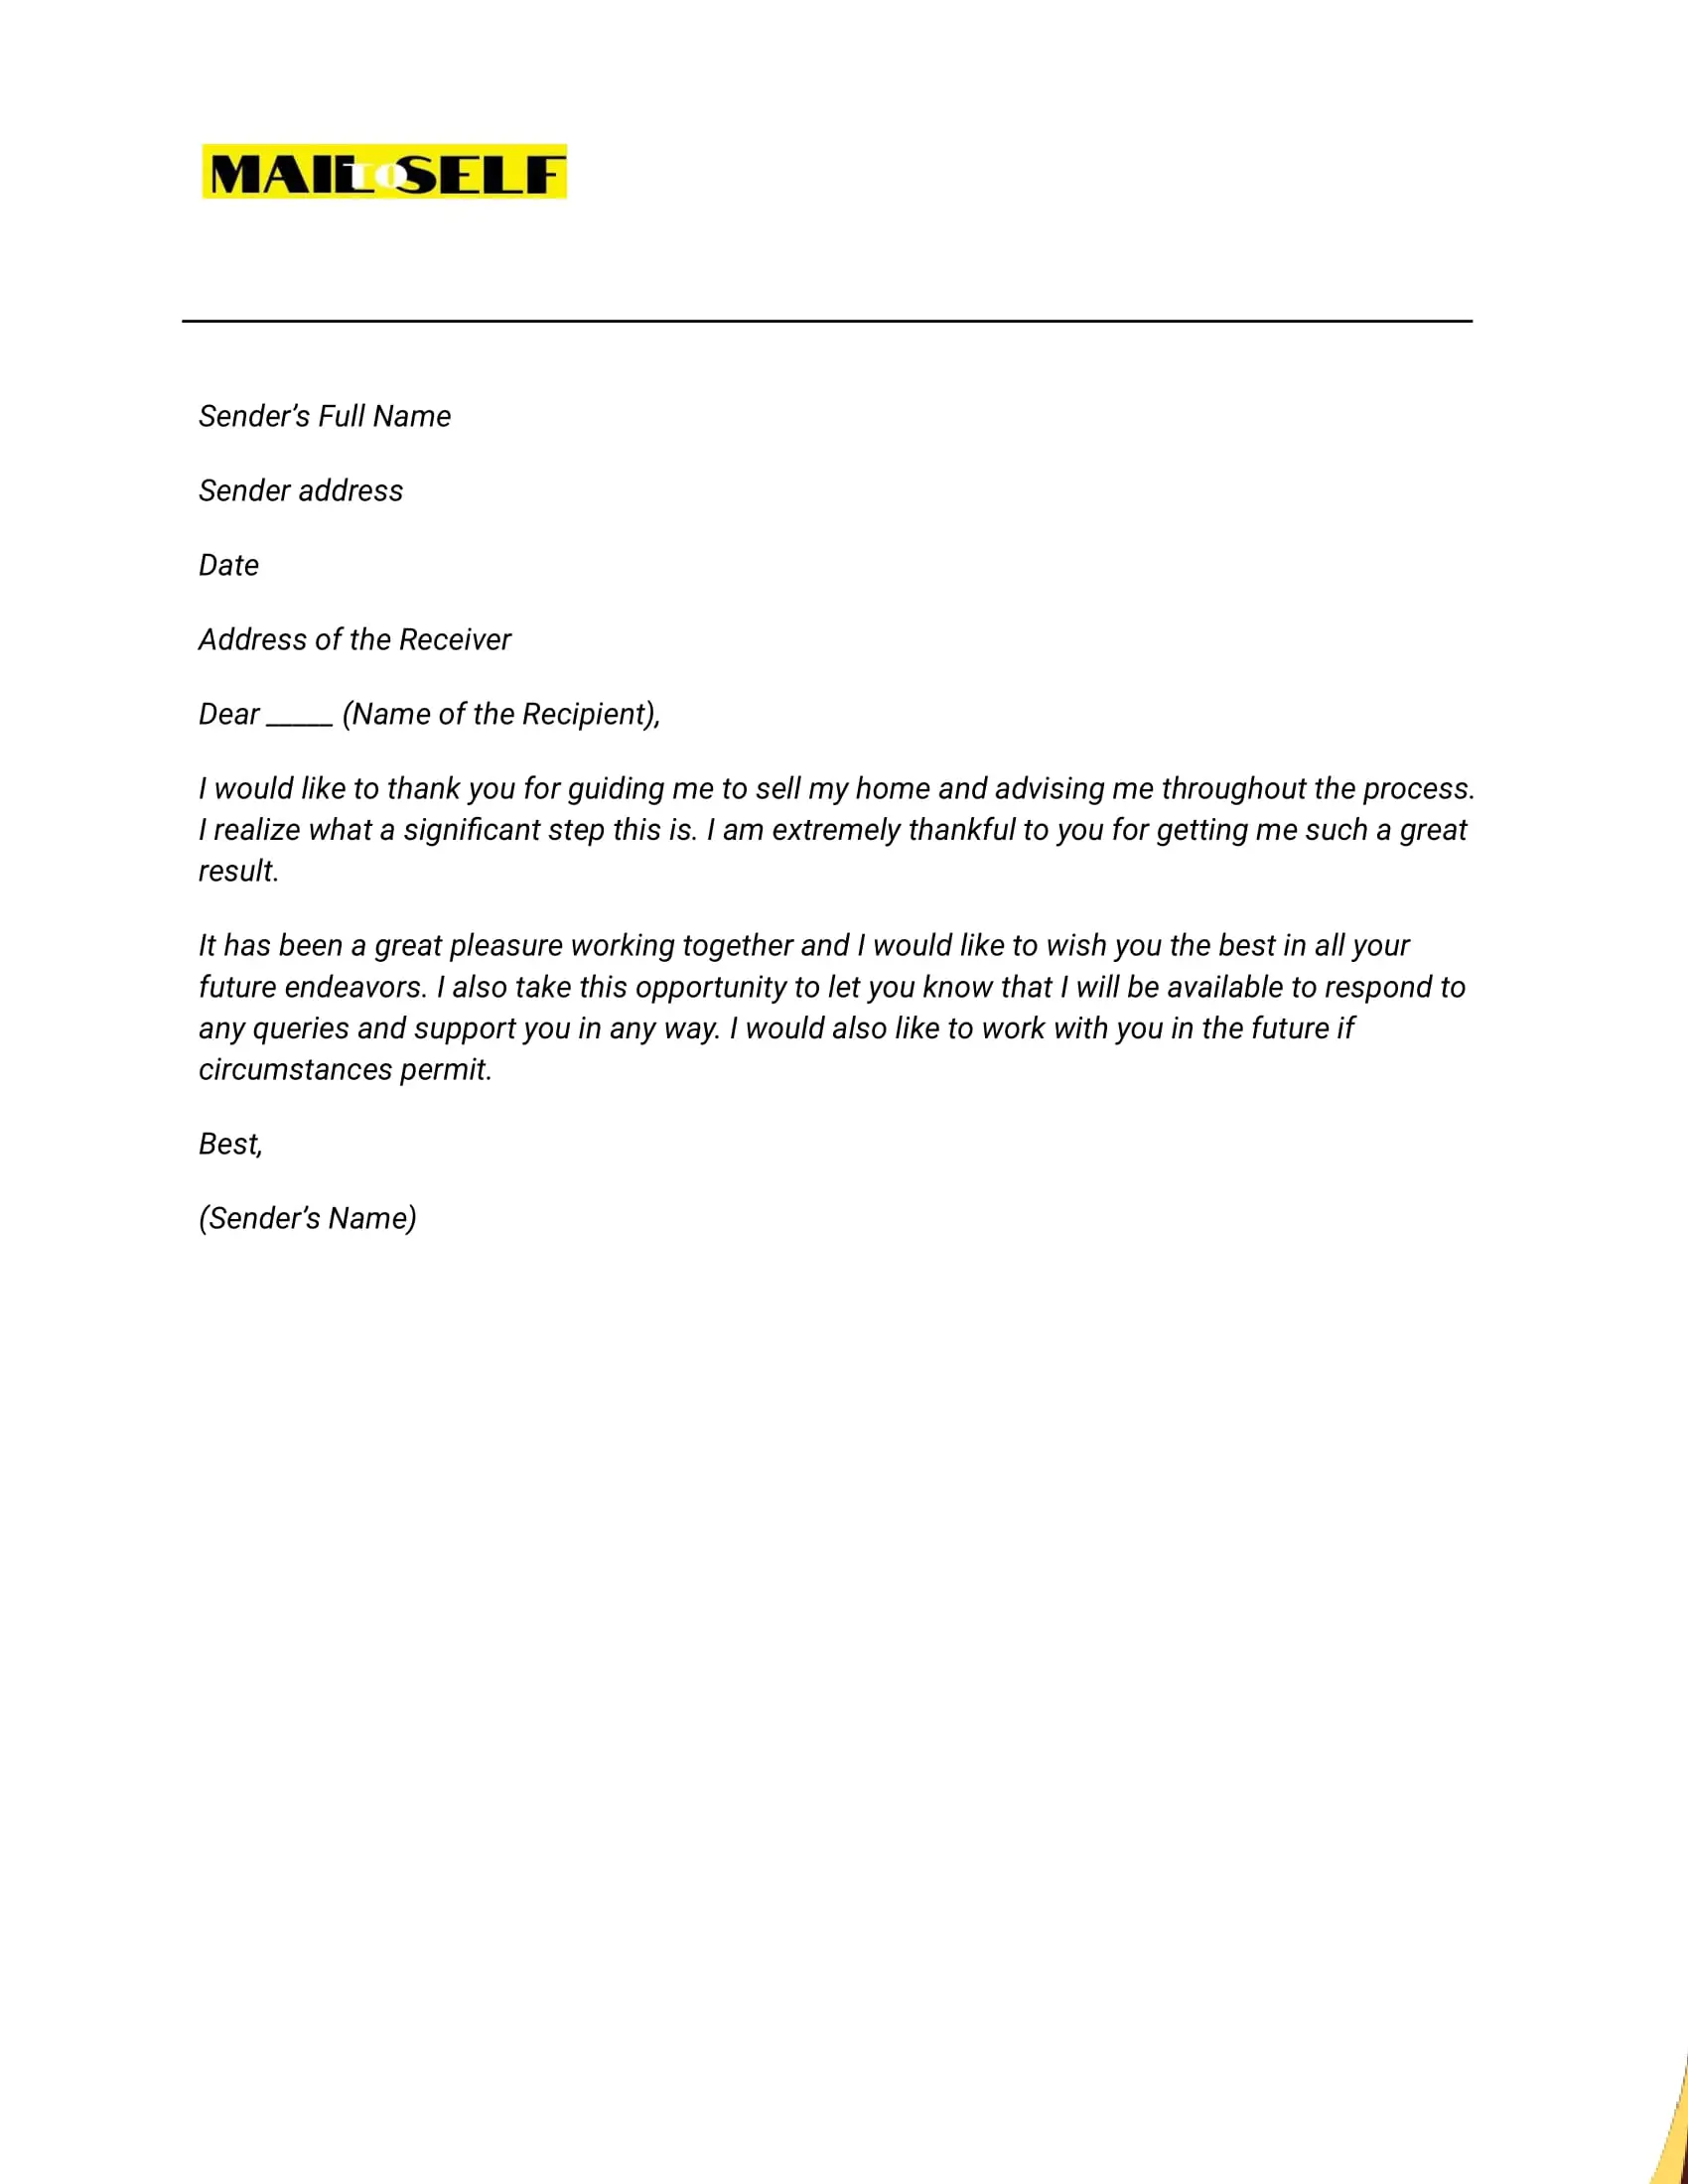 Sample #2 Thank You Letter to Real Estate Agent